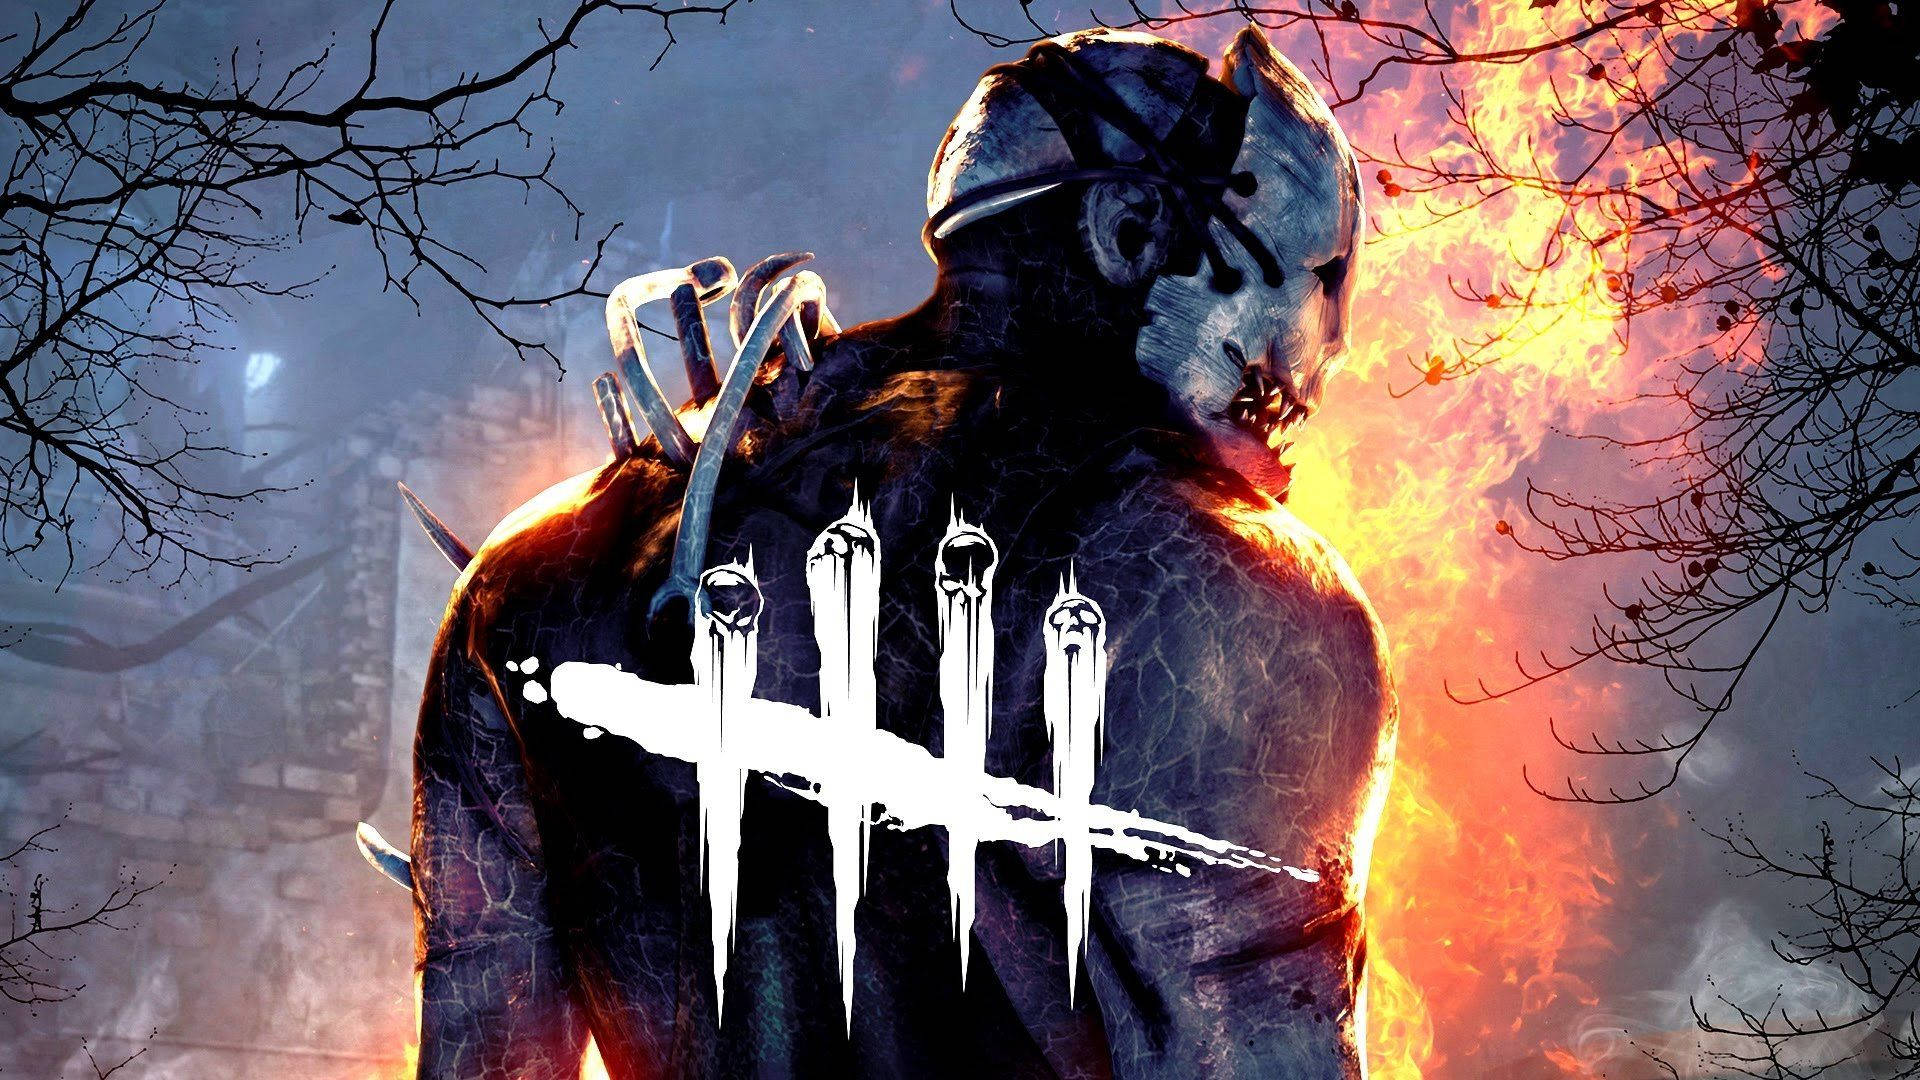 Trapper, the killer in Dead By Daylight, with the game's logo Wallpaper